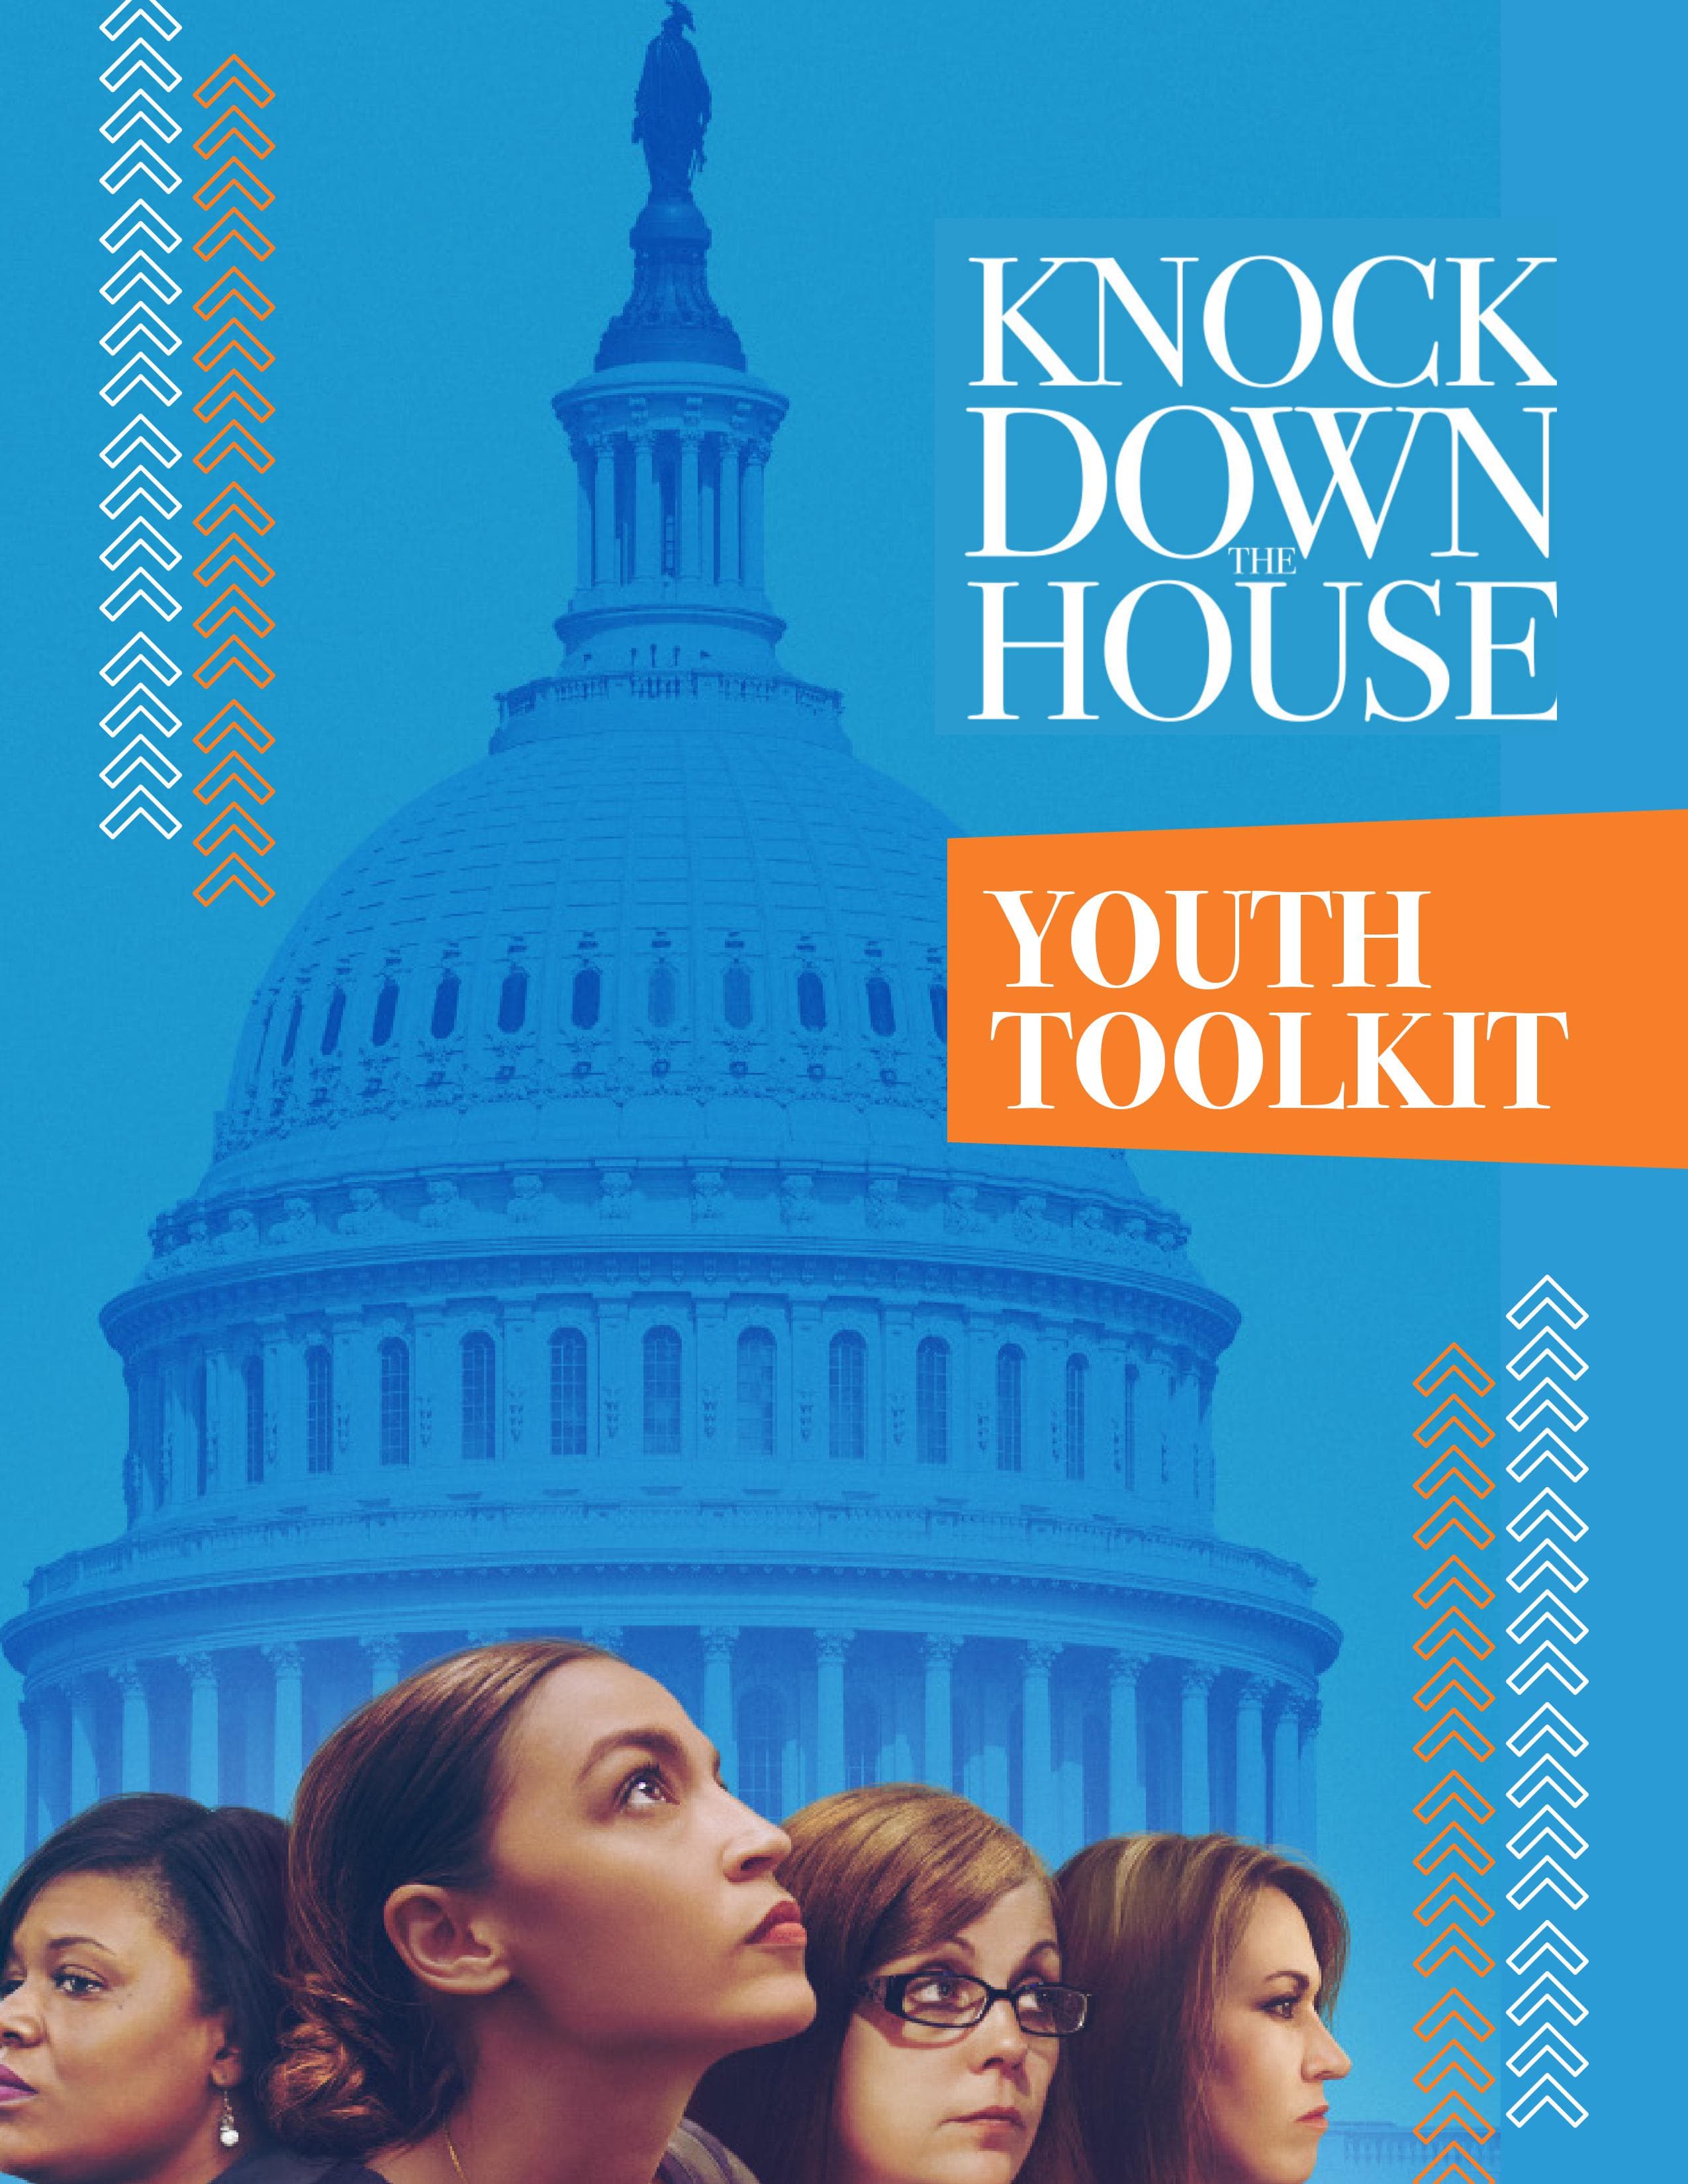 Youth Toolkit Image